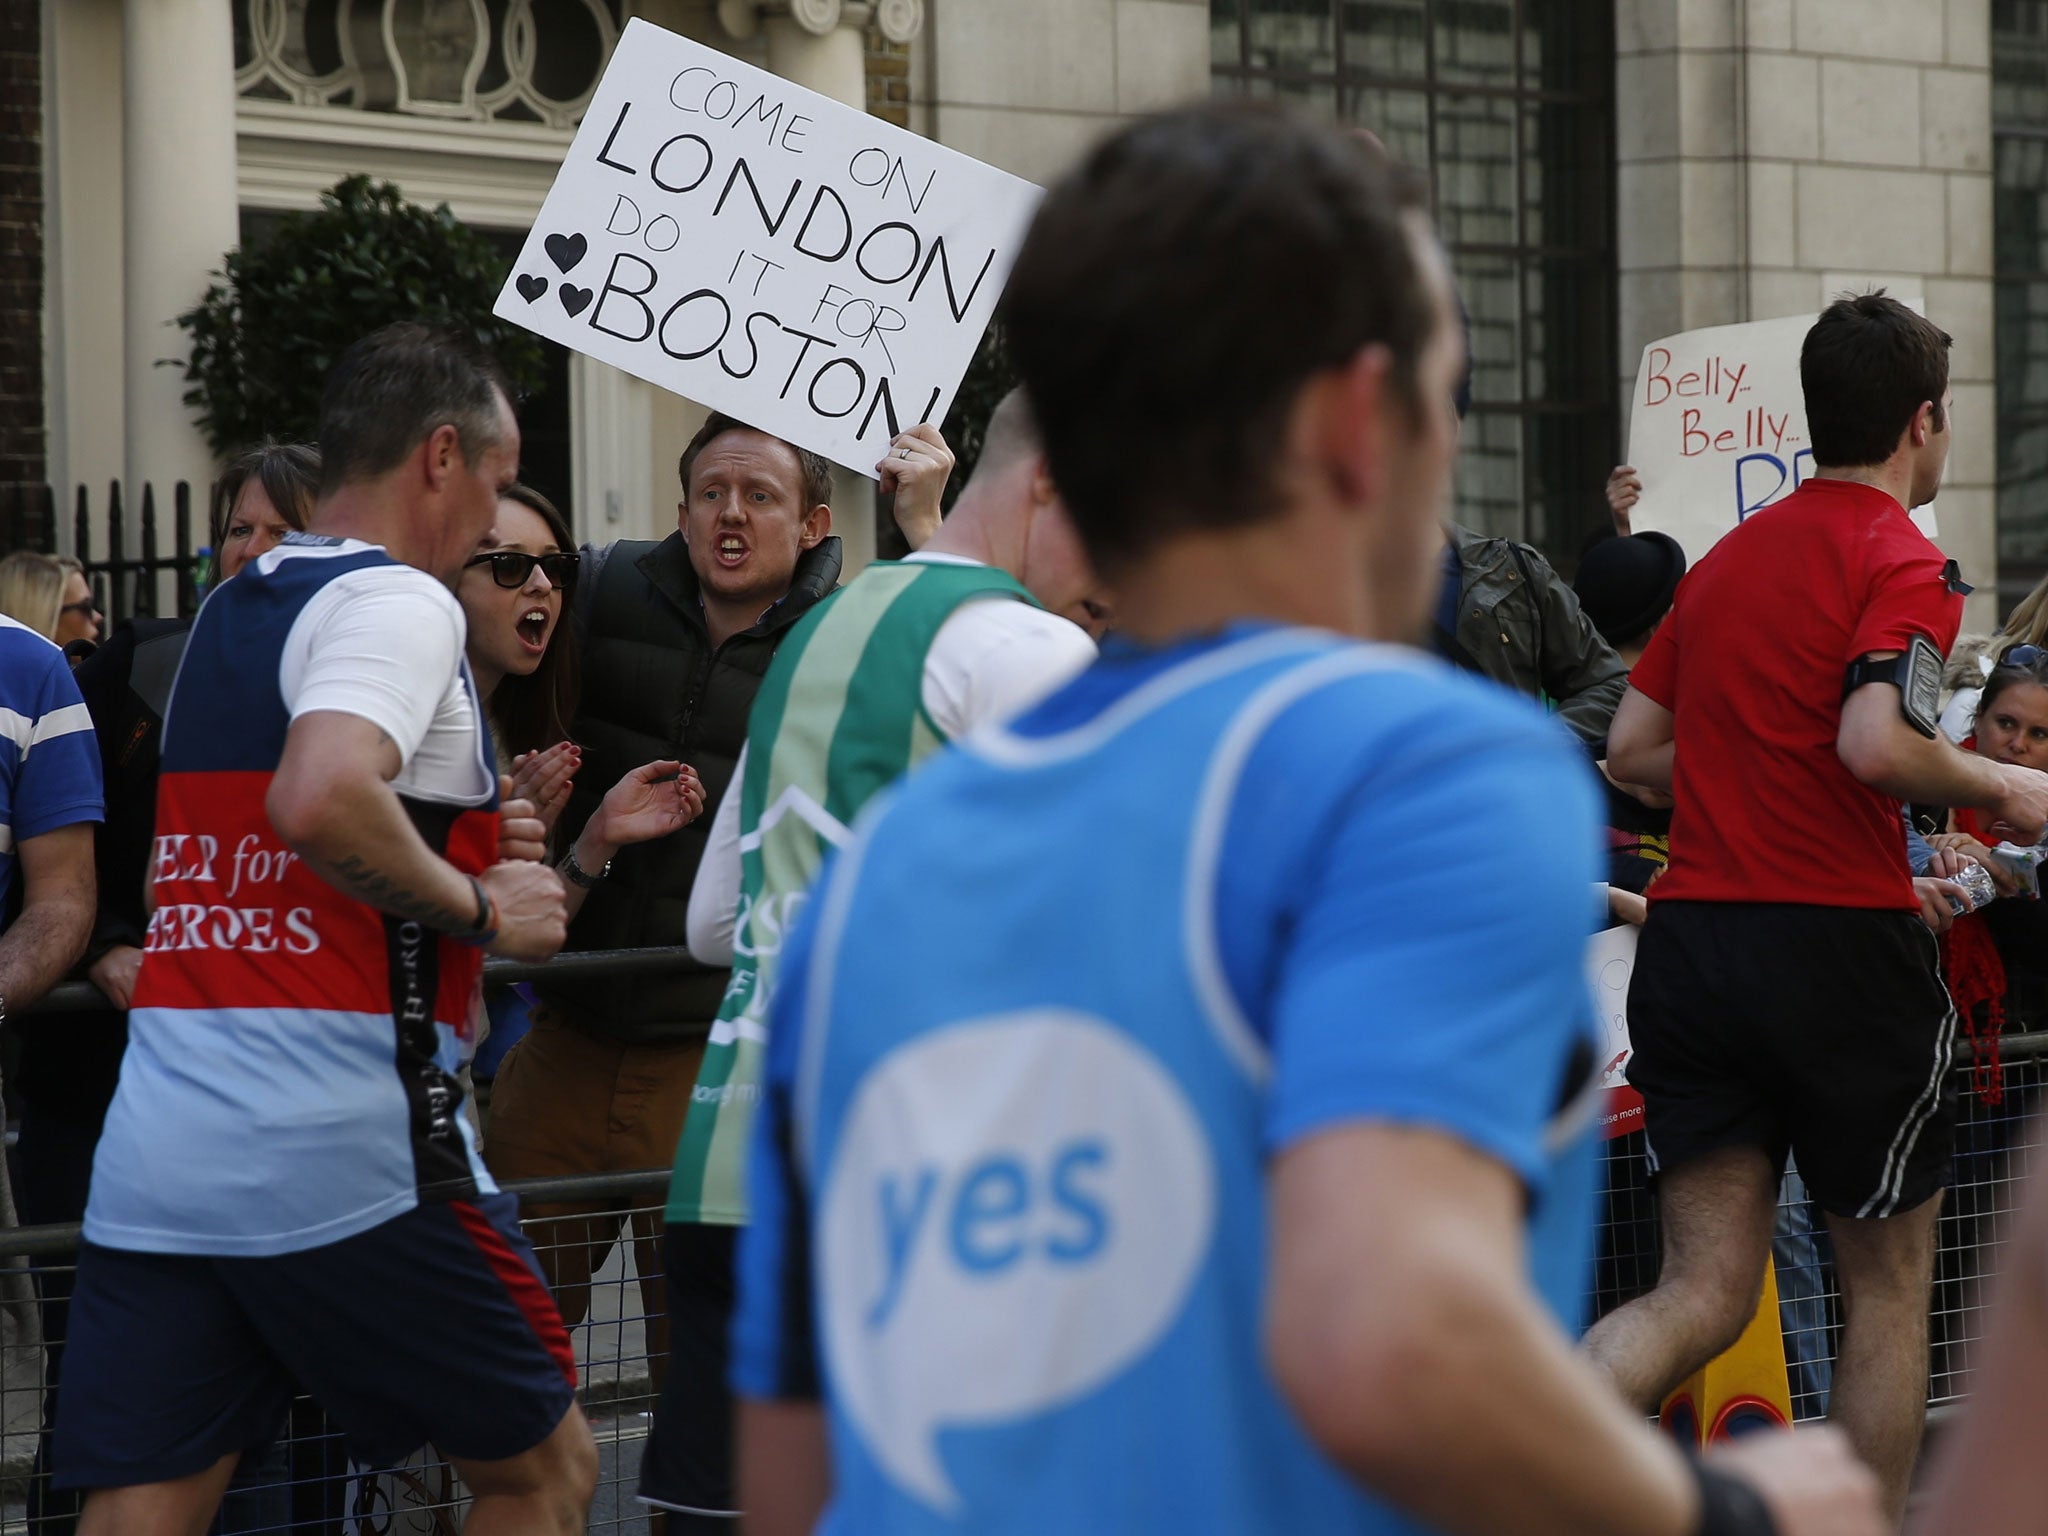 Defying the bombers: Spectators demonstrating their support for Boston at the London Marathon